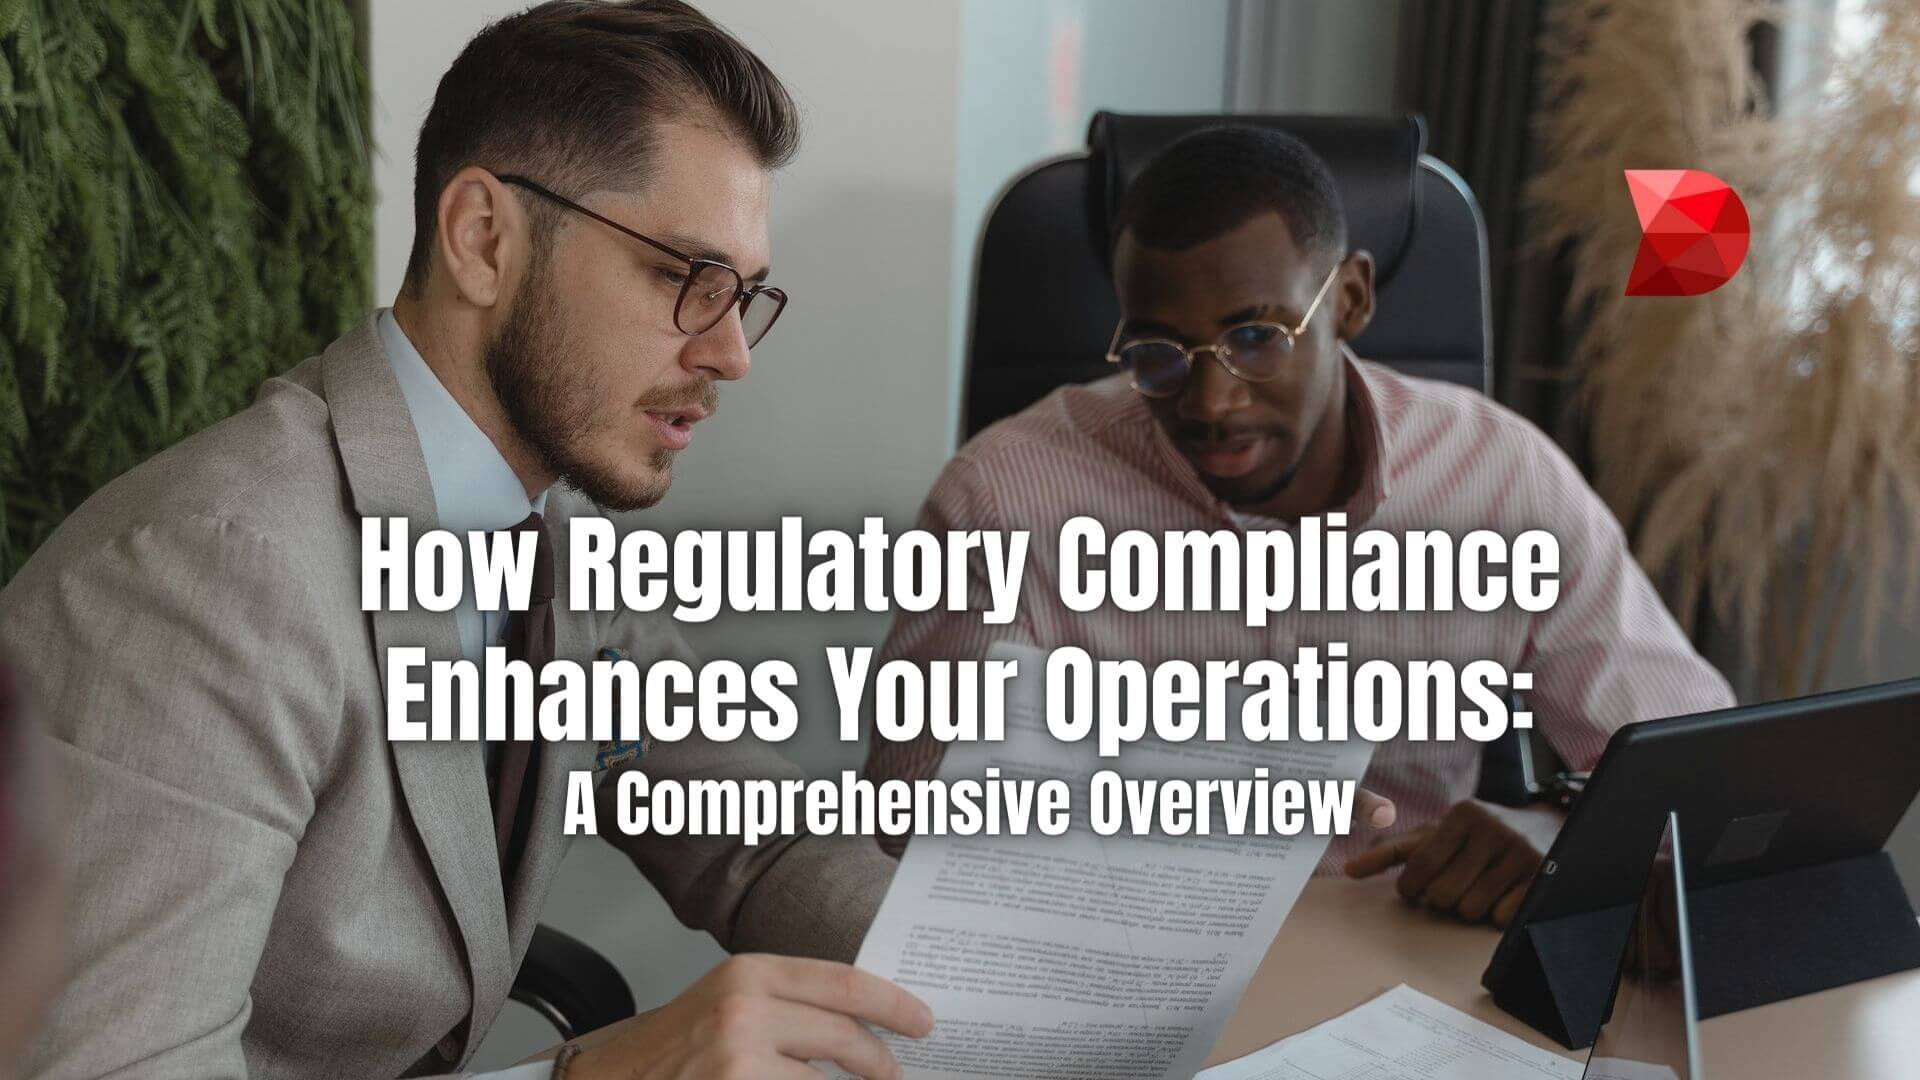 Regulatory compliance is the practice of adhering to laws, regulations, and guidelines relevant to a business's operations. Learn more!